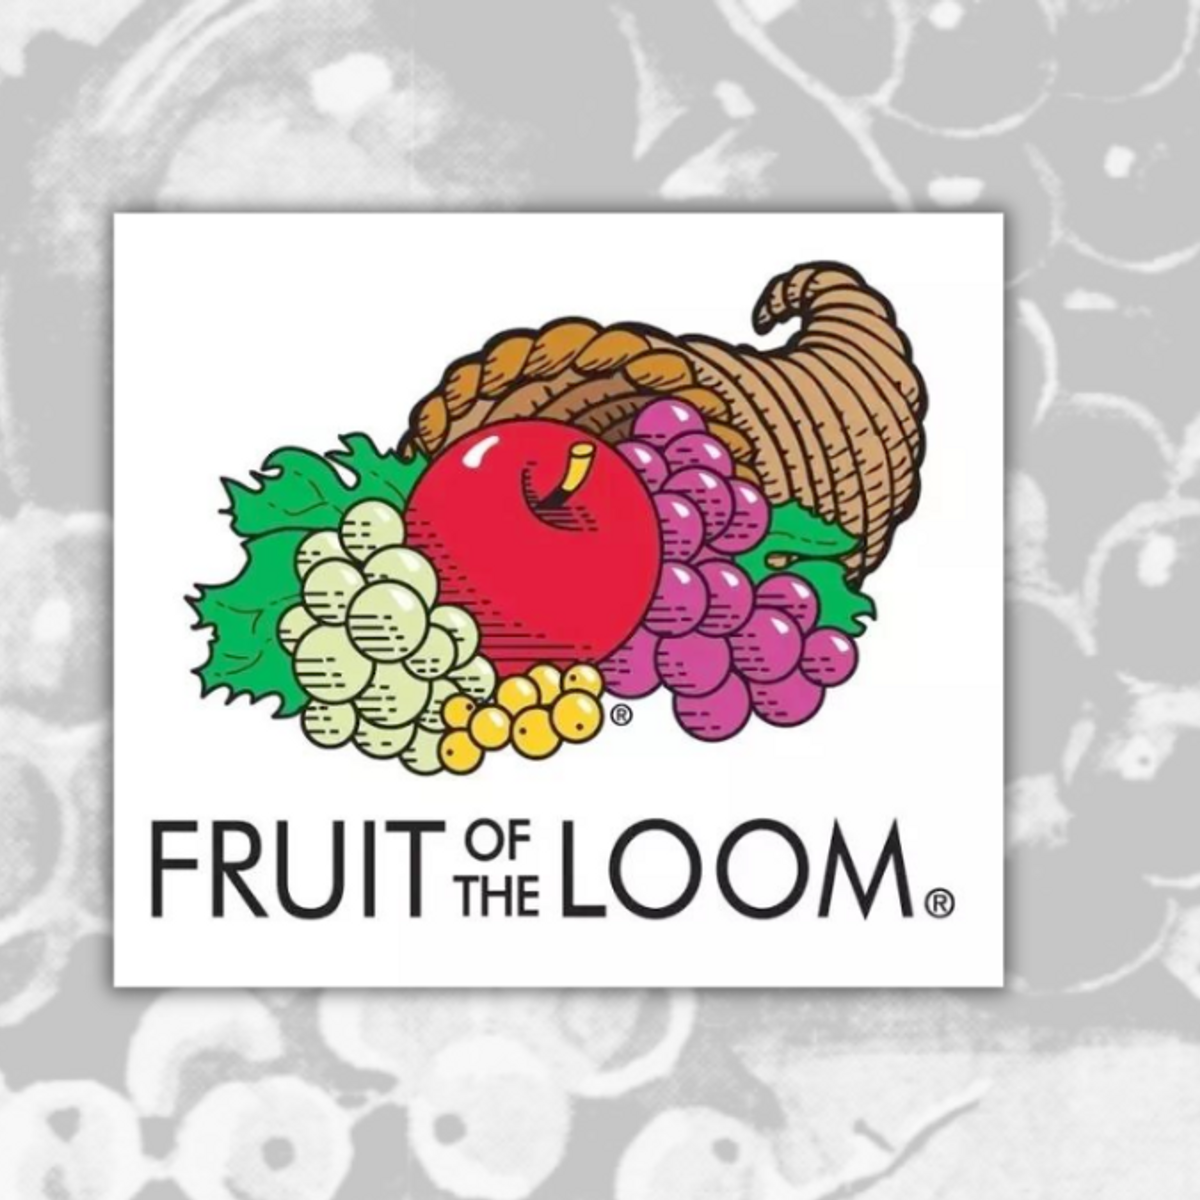 Fruit for Thought: The History of Fruit of the Loom - Habilitate